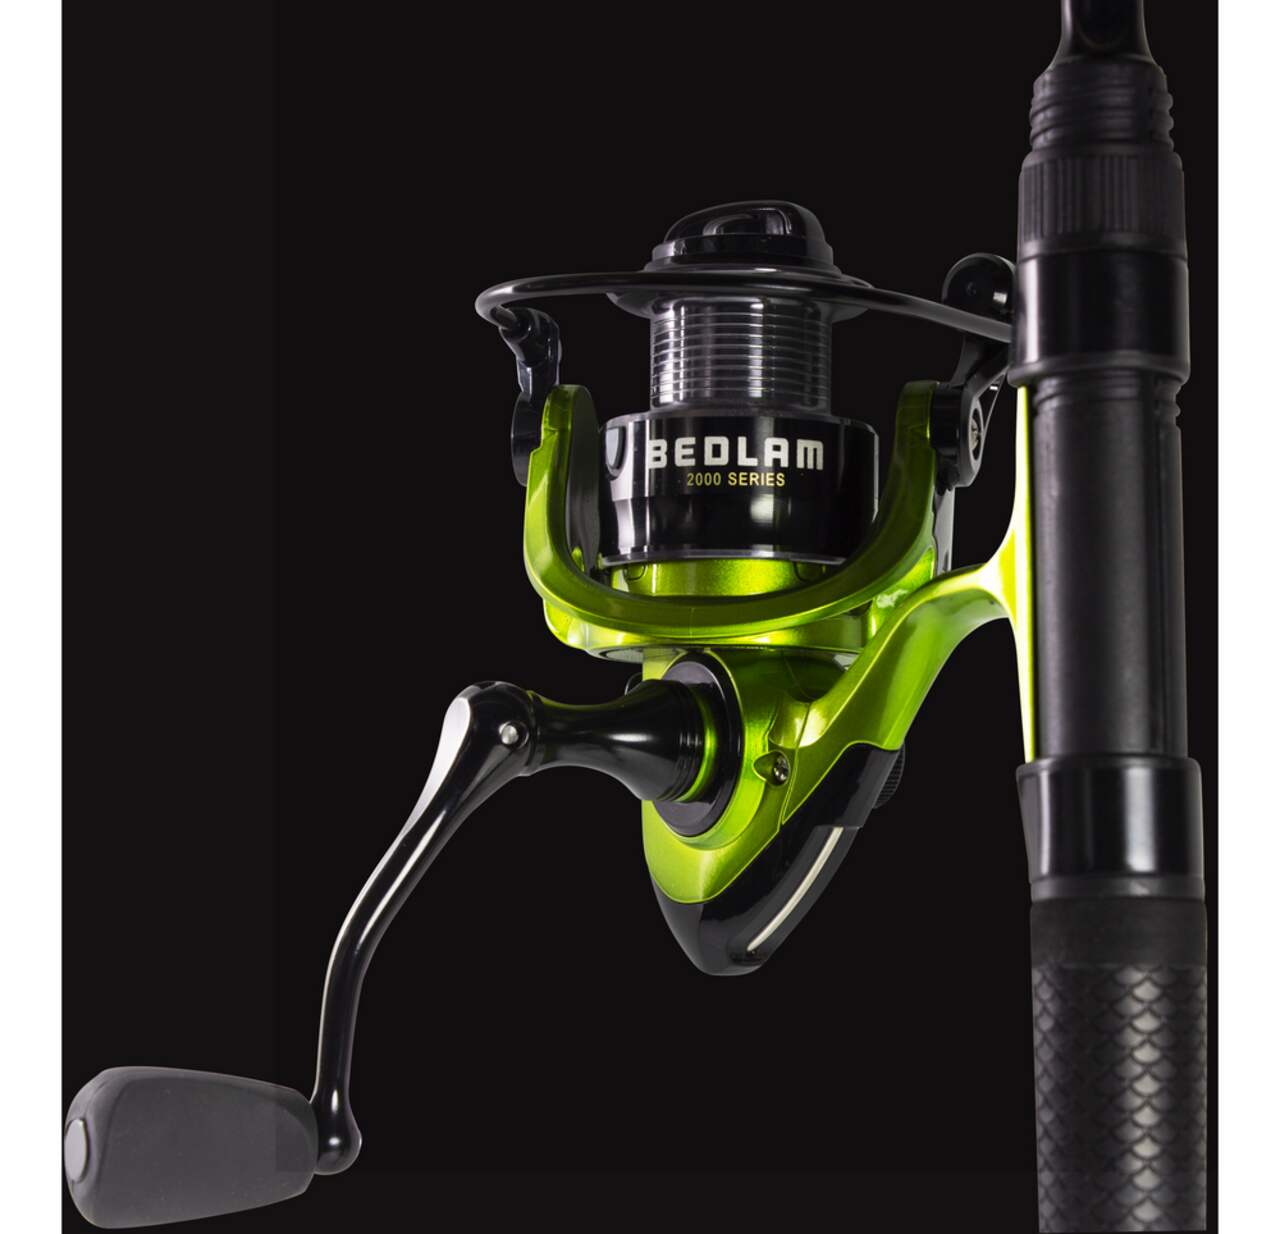 https://media-www.canadiantire.ca/product/playing/fishing/fishing-equipment/1784941/lunkerhunt-bedlam-spinning-combo-6-8-medium-cc010997-d3ff-42e5-8115-11808adf1276.png?imdensity=1&imwidth=1244&impolicy=mZoom